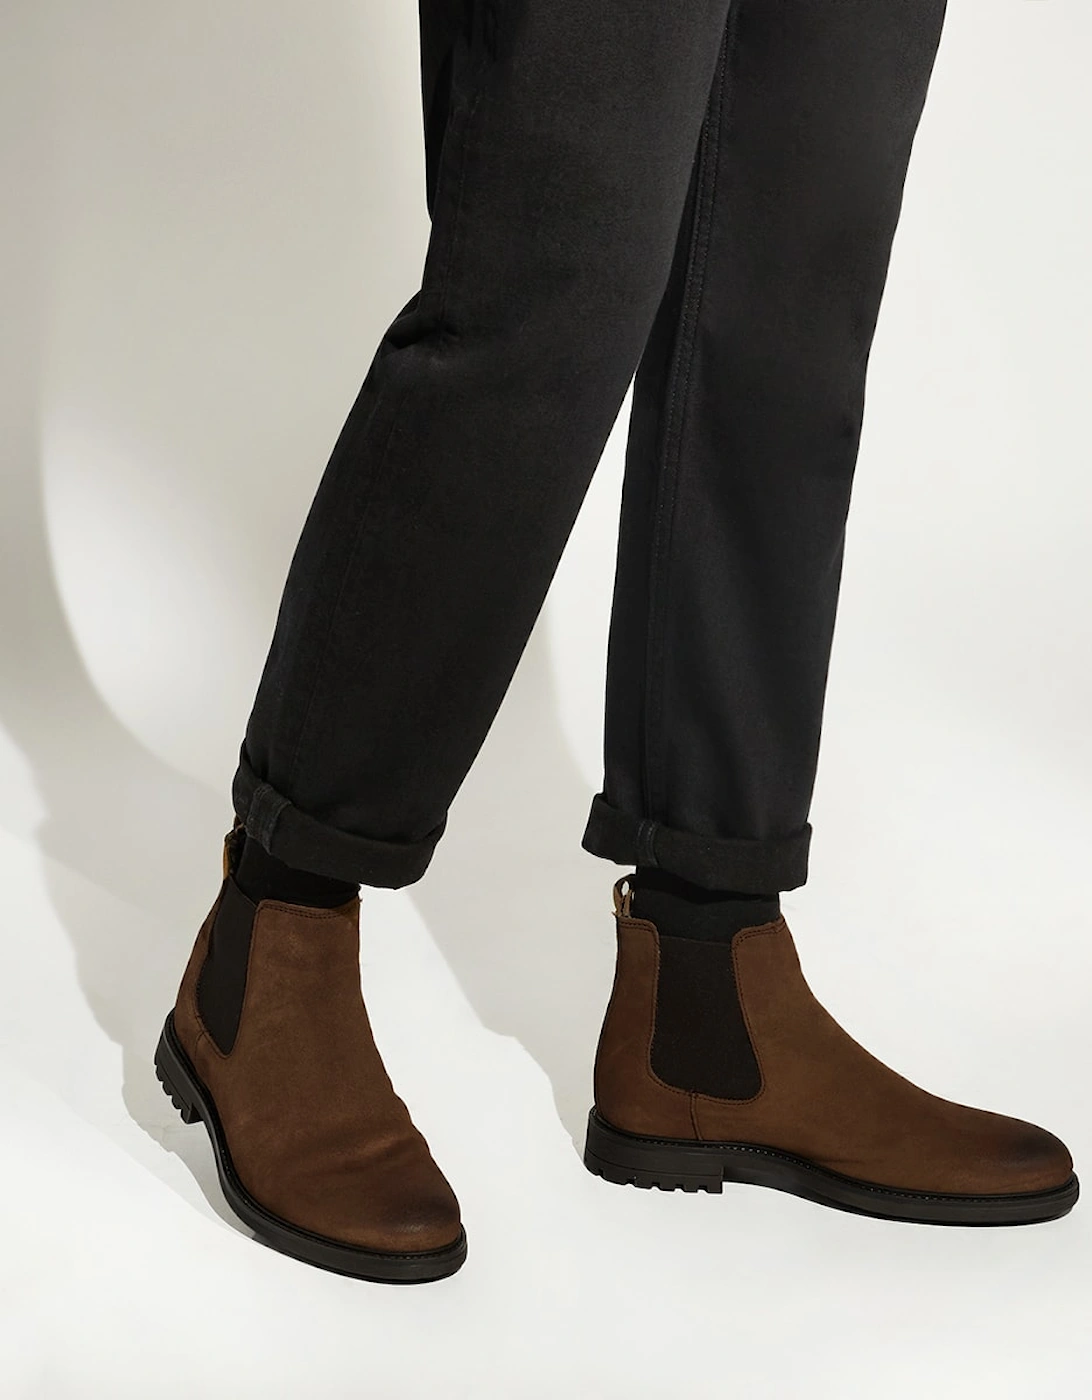 Mens Coldestt - Warm-Lined Suede Chelsea Boots